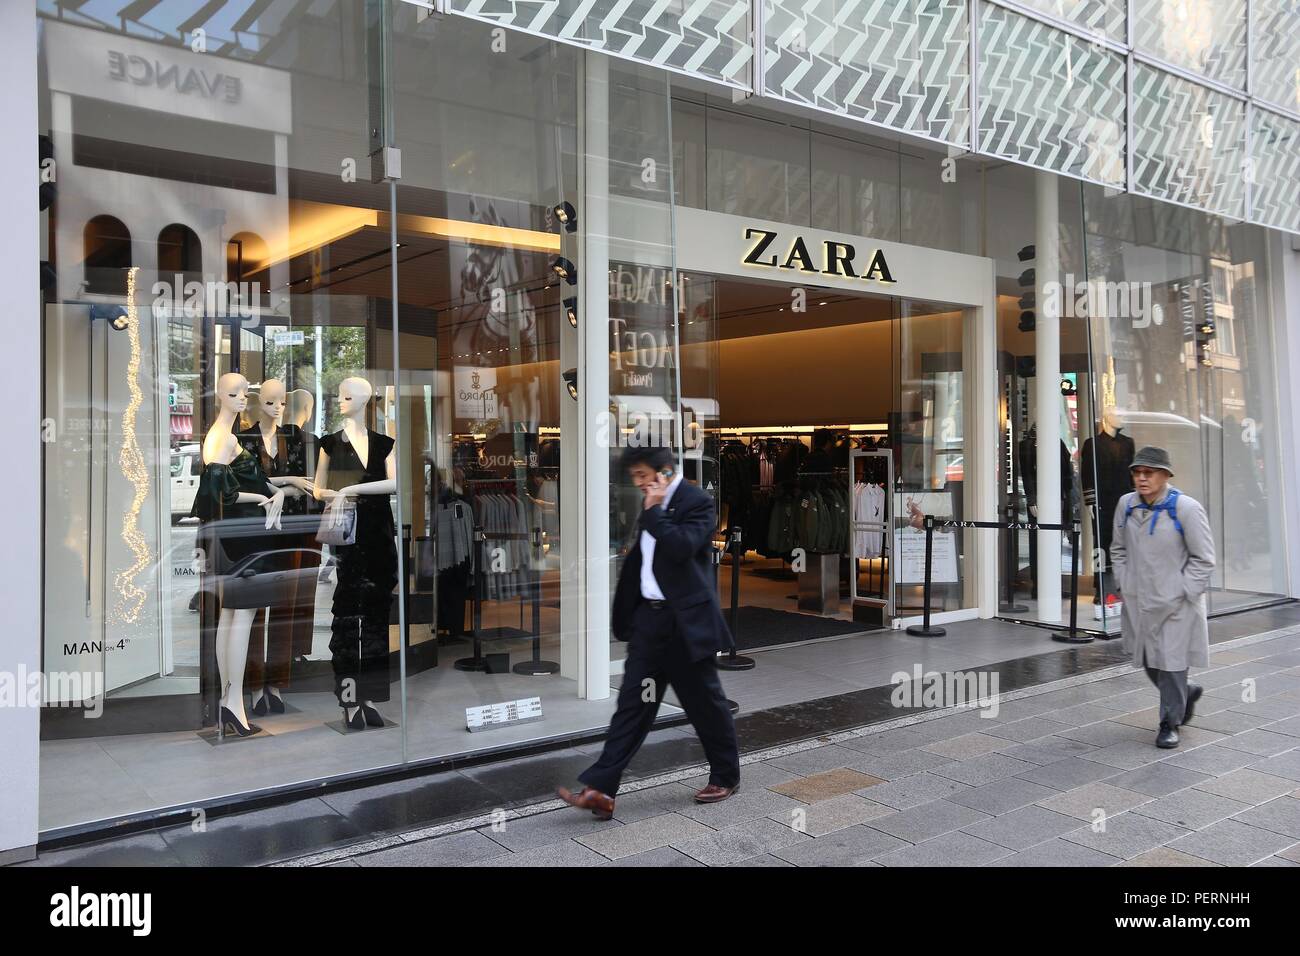 TOKYO, JAPAN - DECEMBER 1, 2016: People walk by Zara garment store at Ginza  district of Tokyo, Japan. Ginza is a legendary shopping area in Chuo Ward  Stock Photo - Alamy